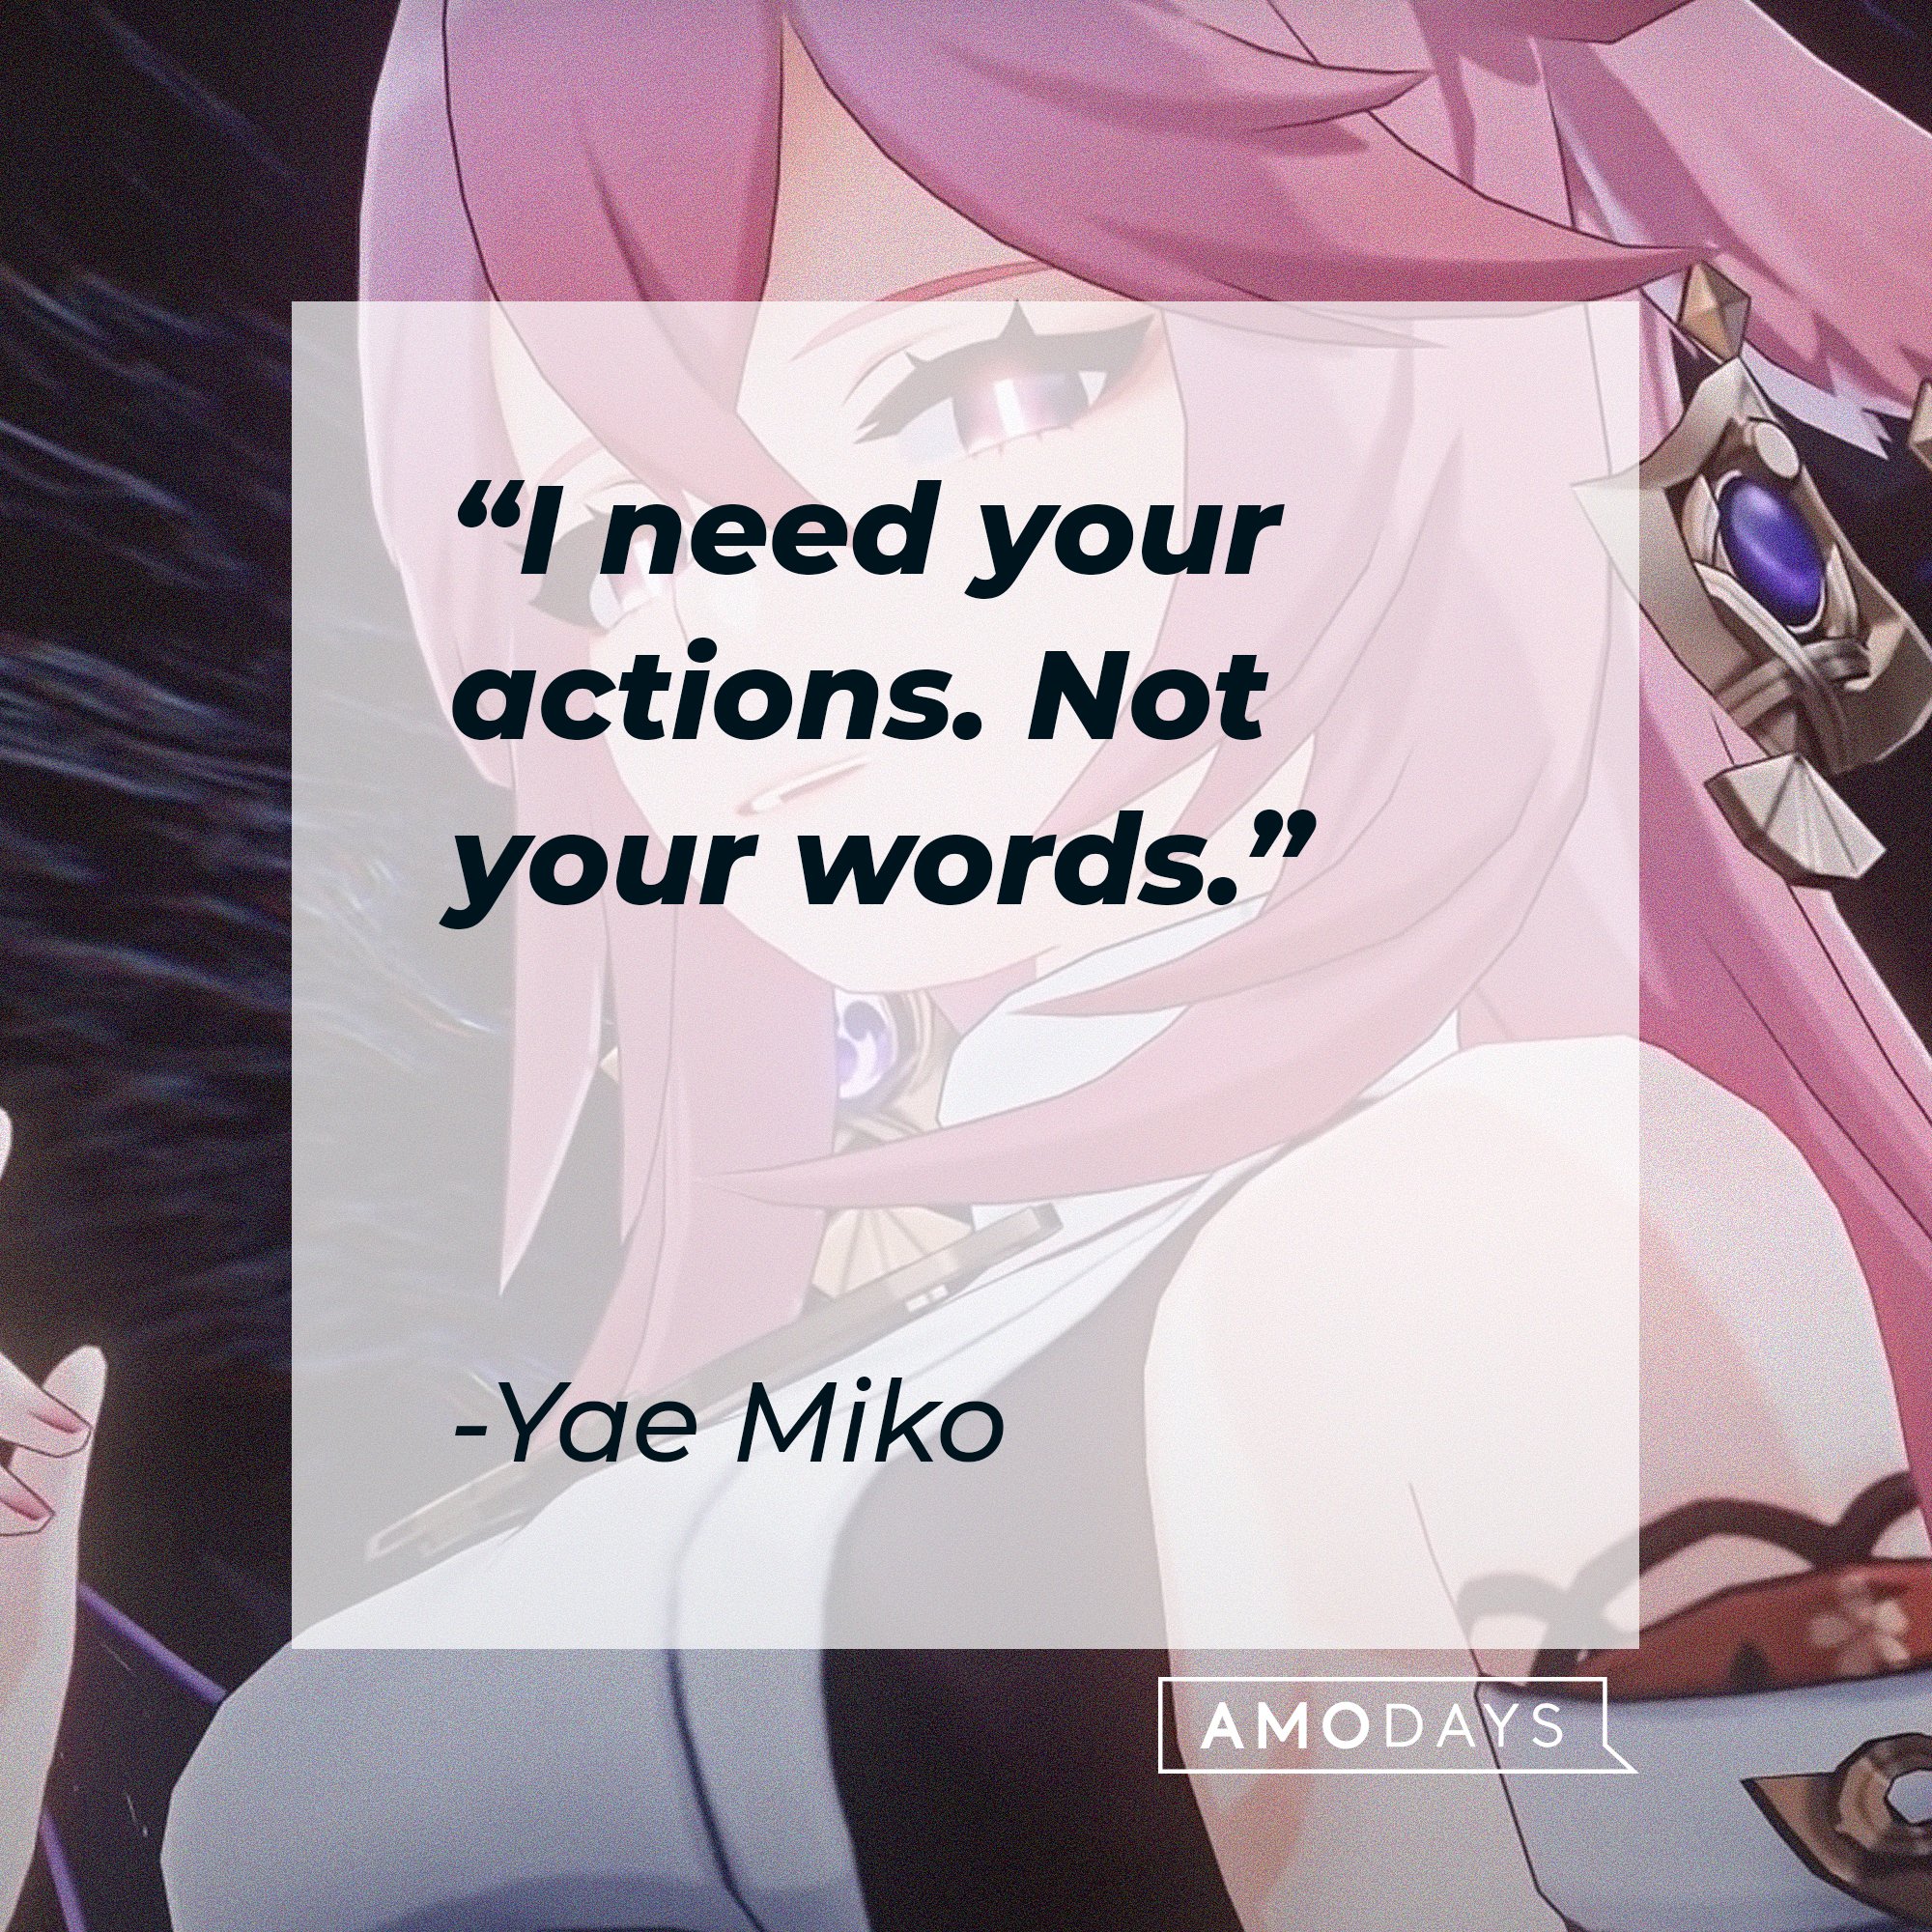 Yae Miko's quote: "I need your actions. Not your words." | Image: AmoDays